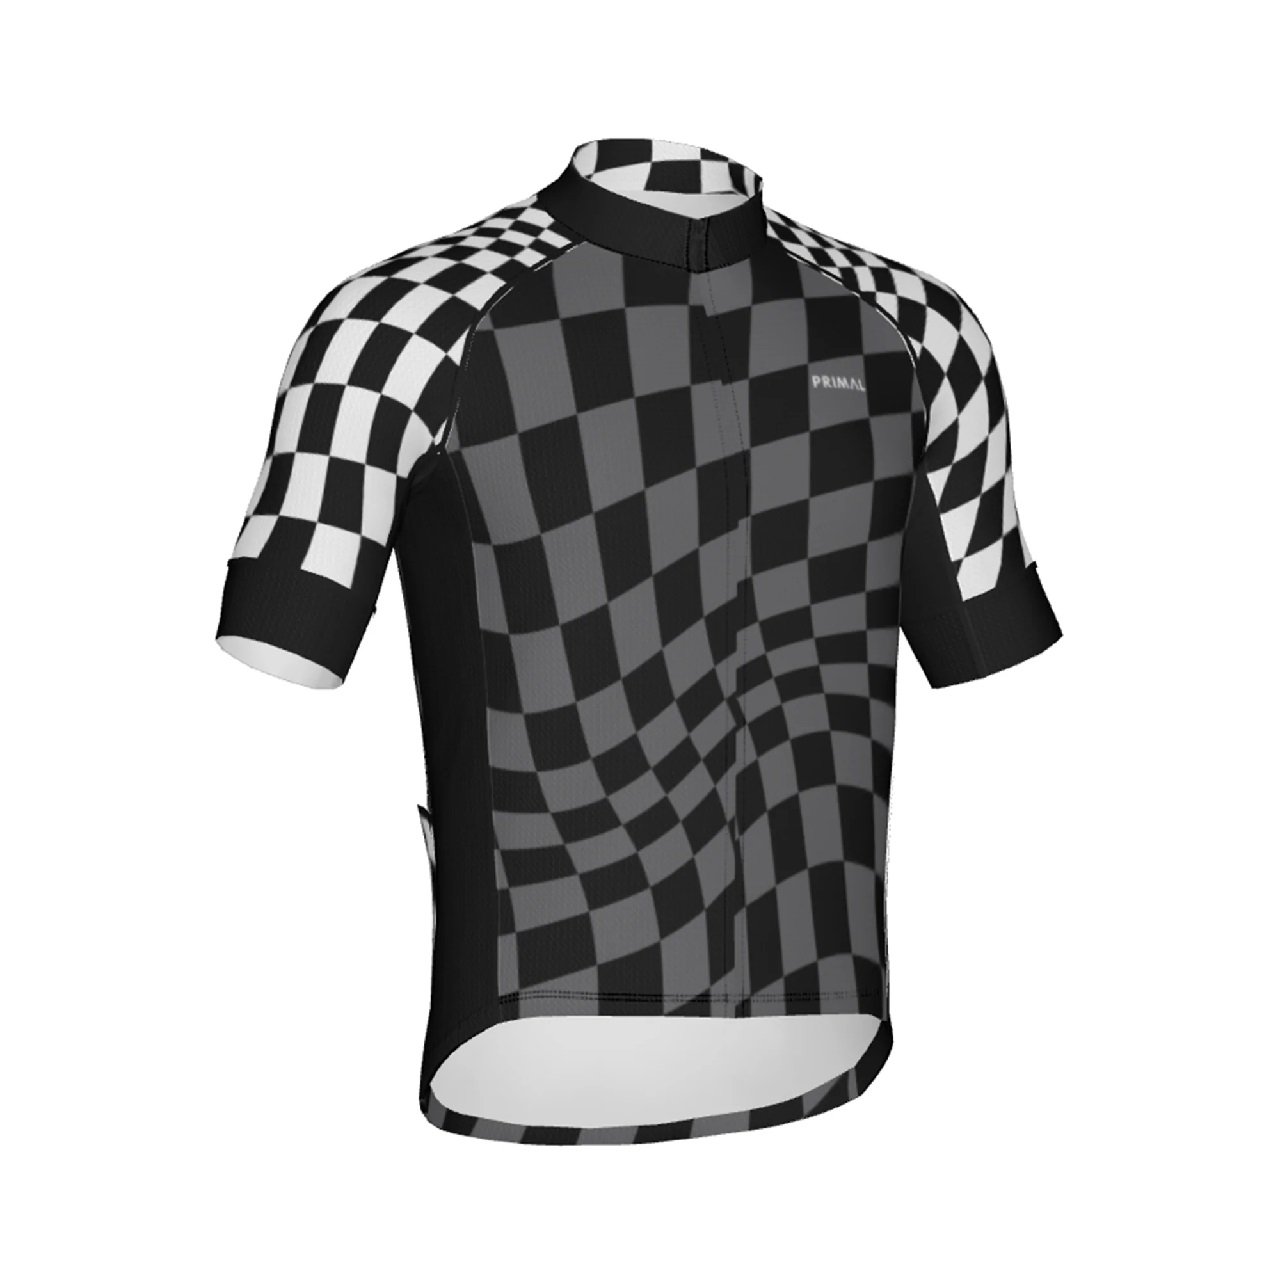 Check Mate Men's Evo 2.0 Cycling Jersey by Primal